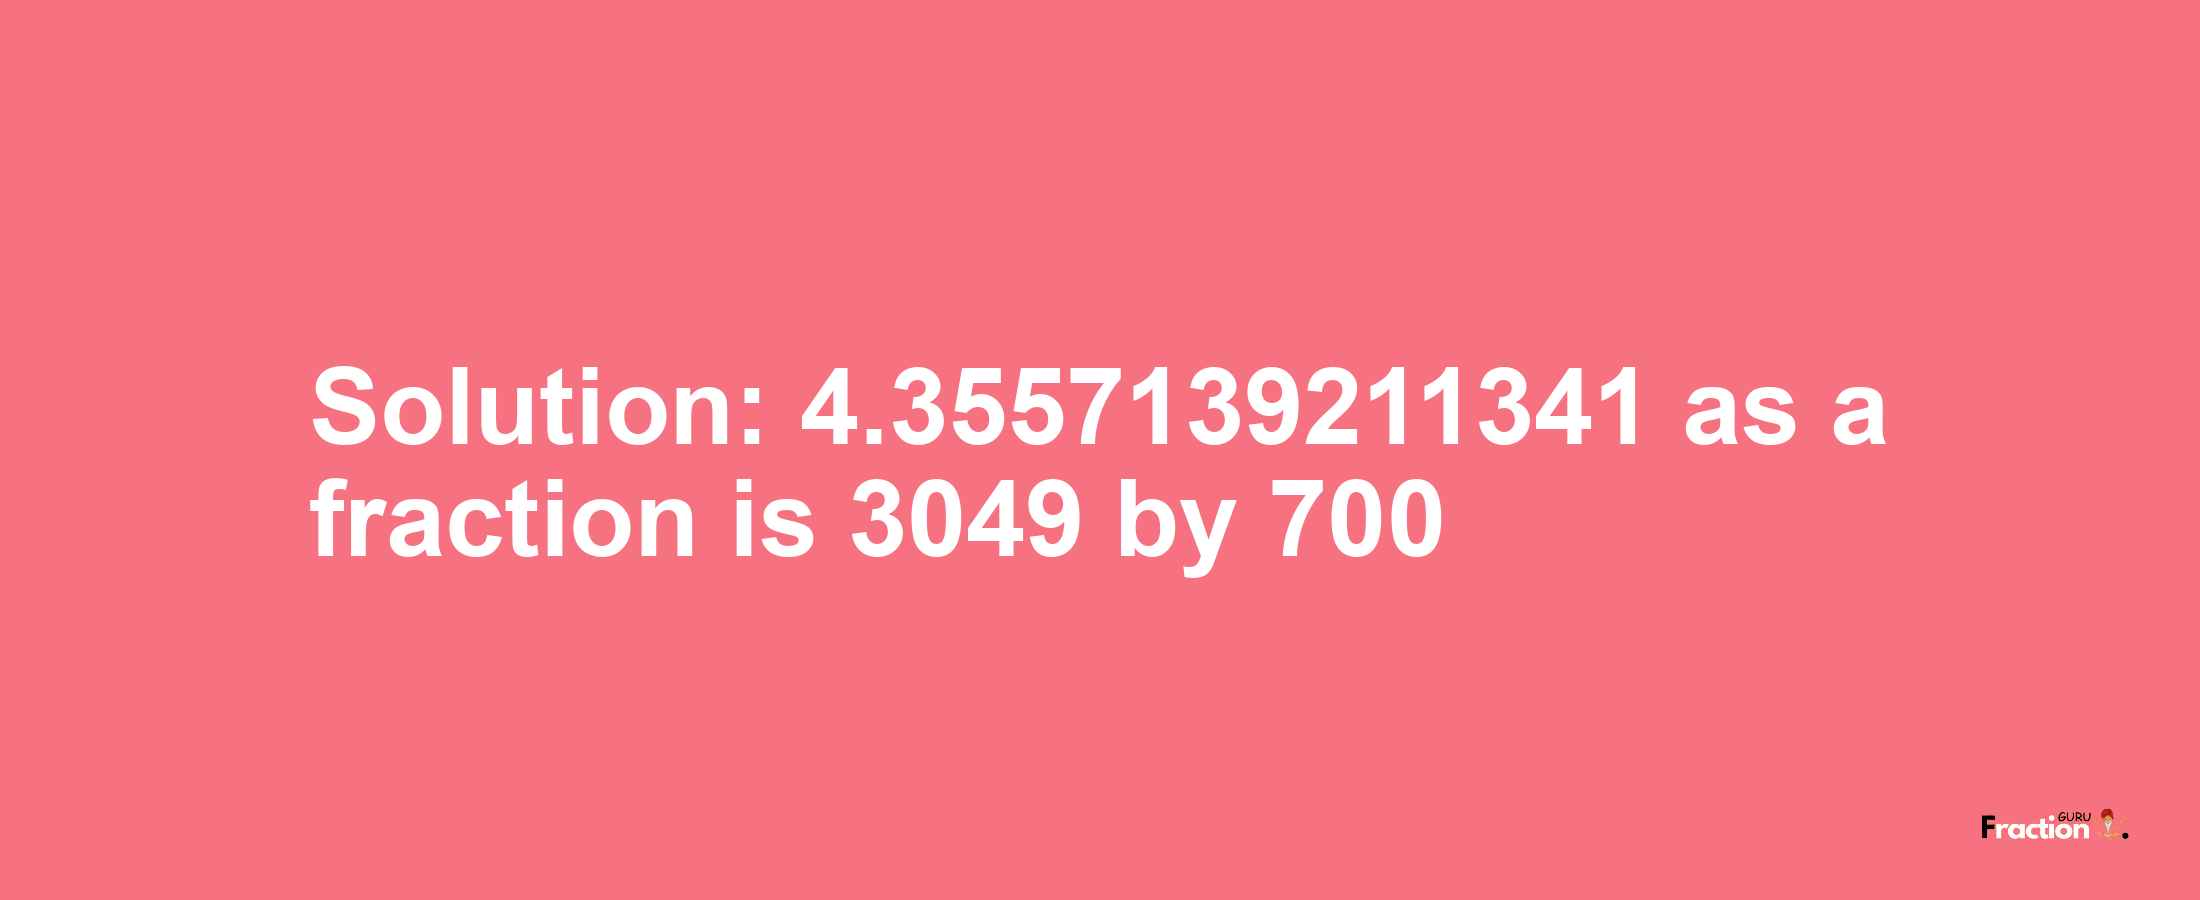 Solution:4.3557139211341 as a fraction is 3049/700